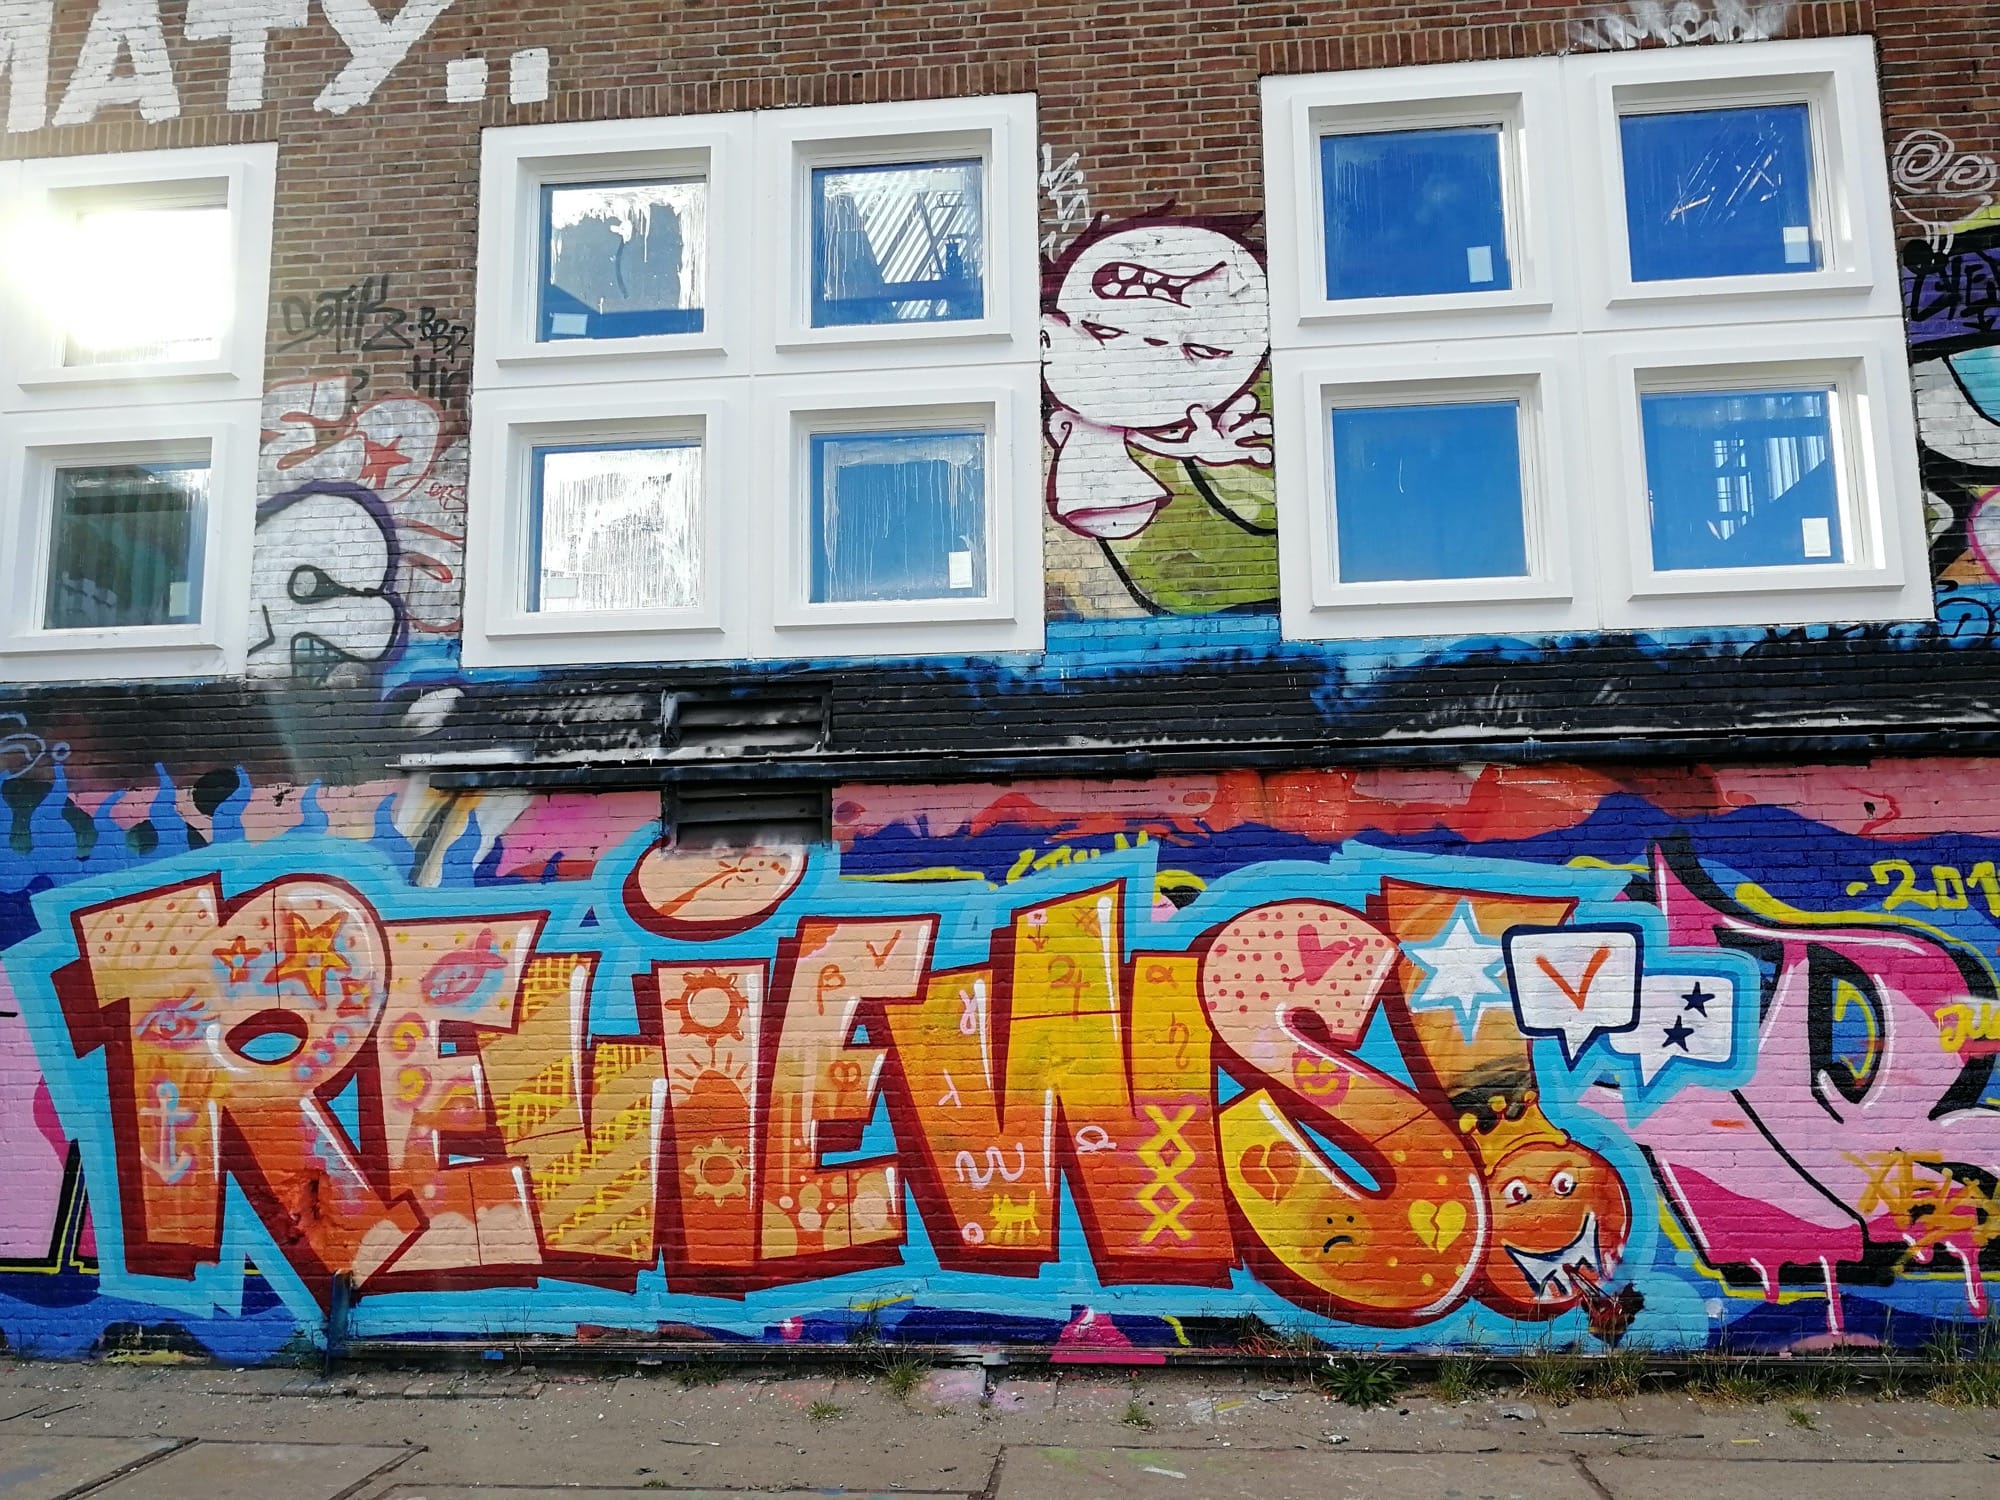 Graffiti 1726 Reviews! captured by Rabot in Amsterdam Netherlands